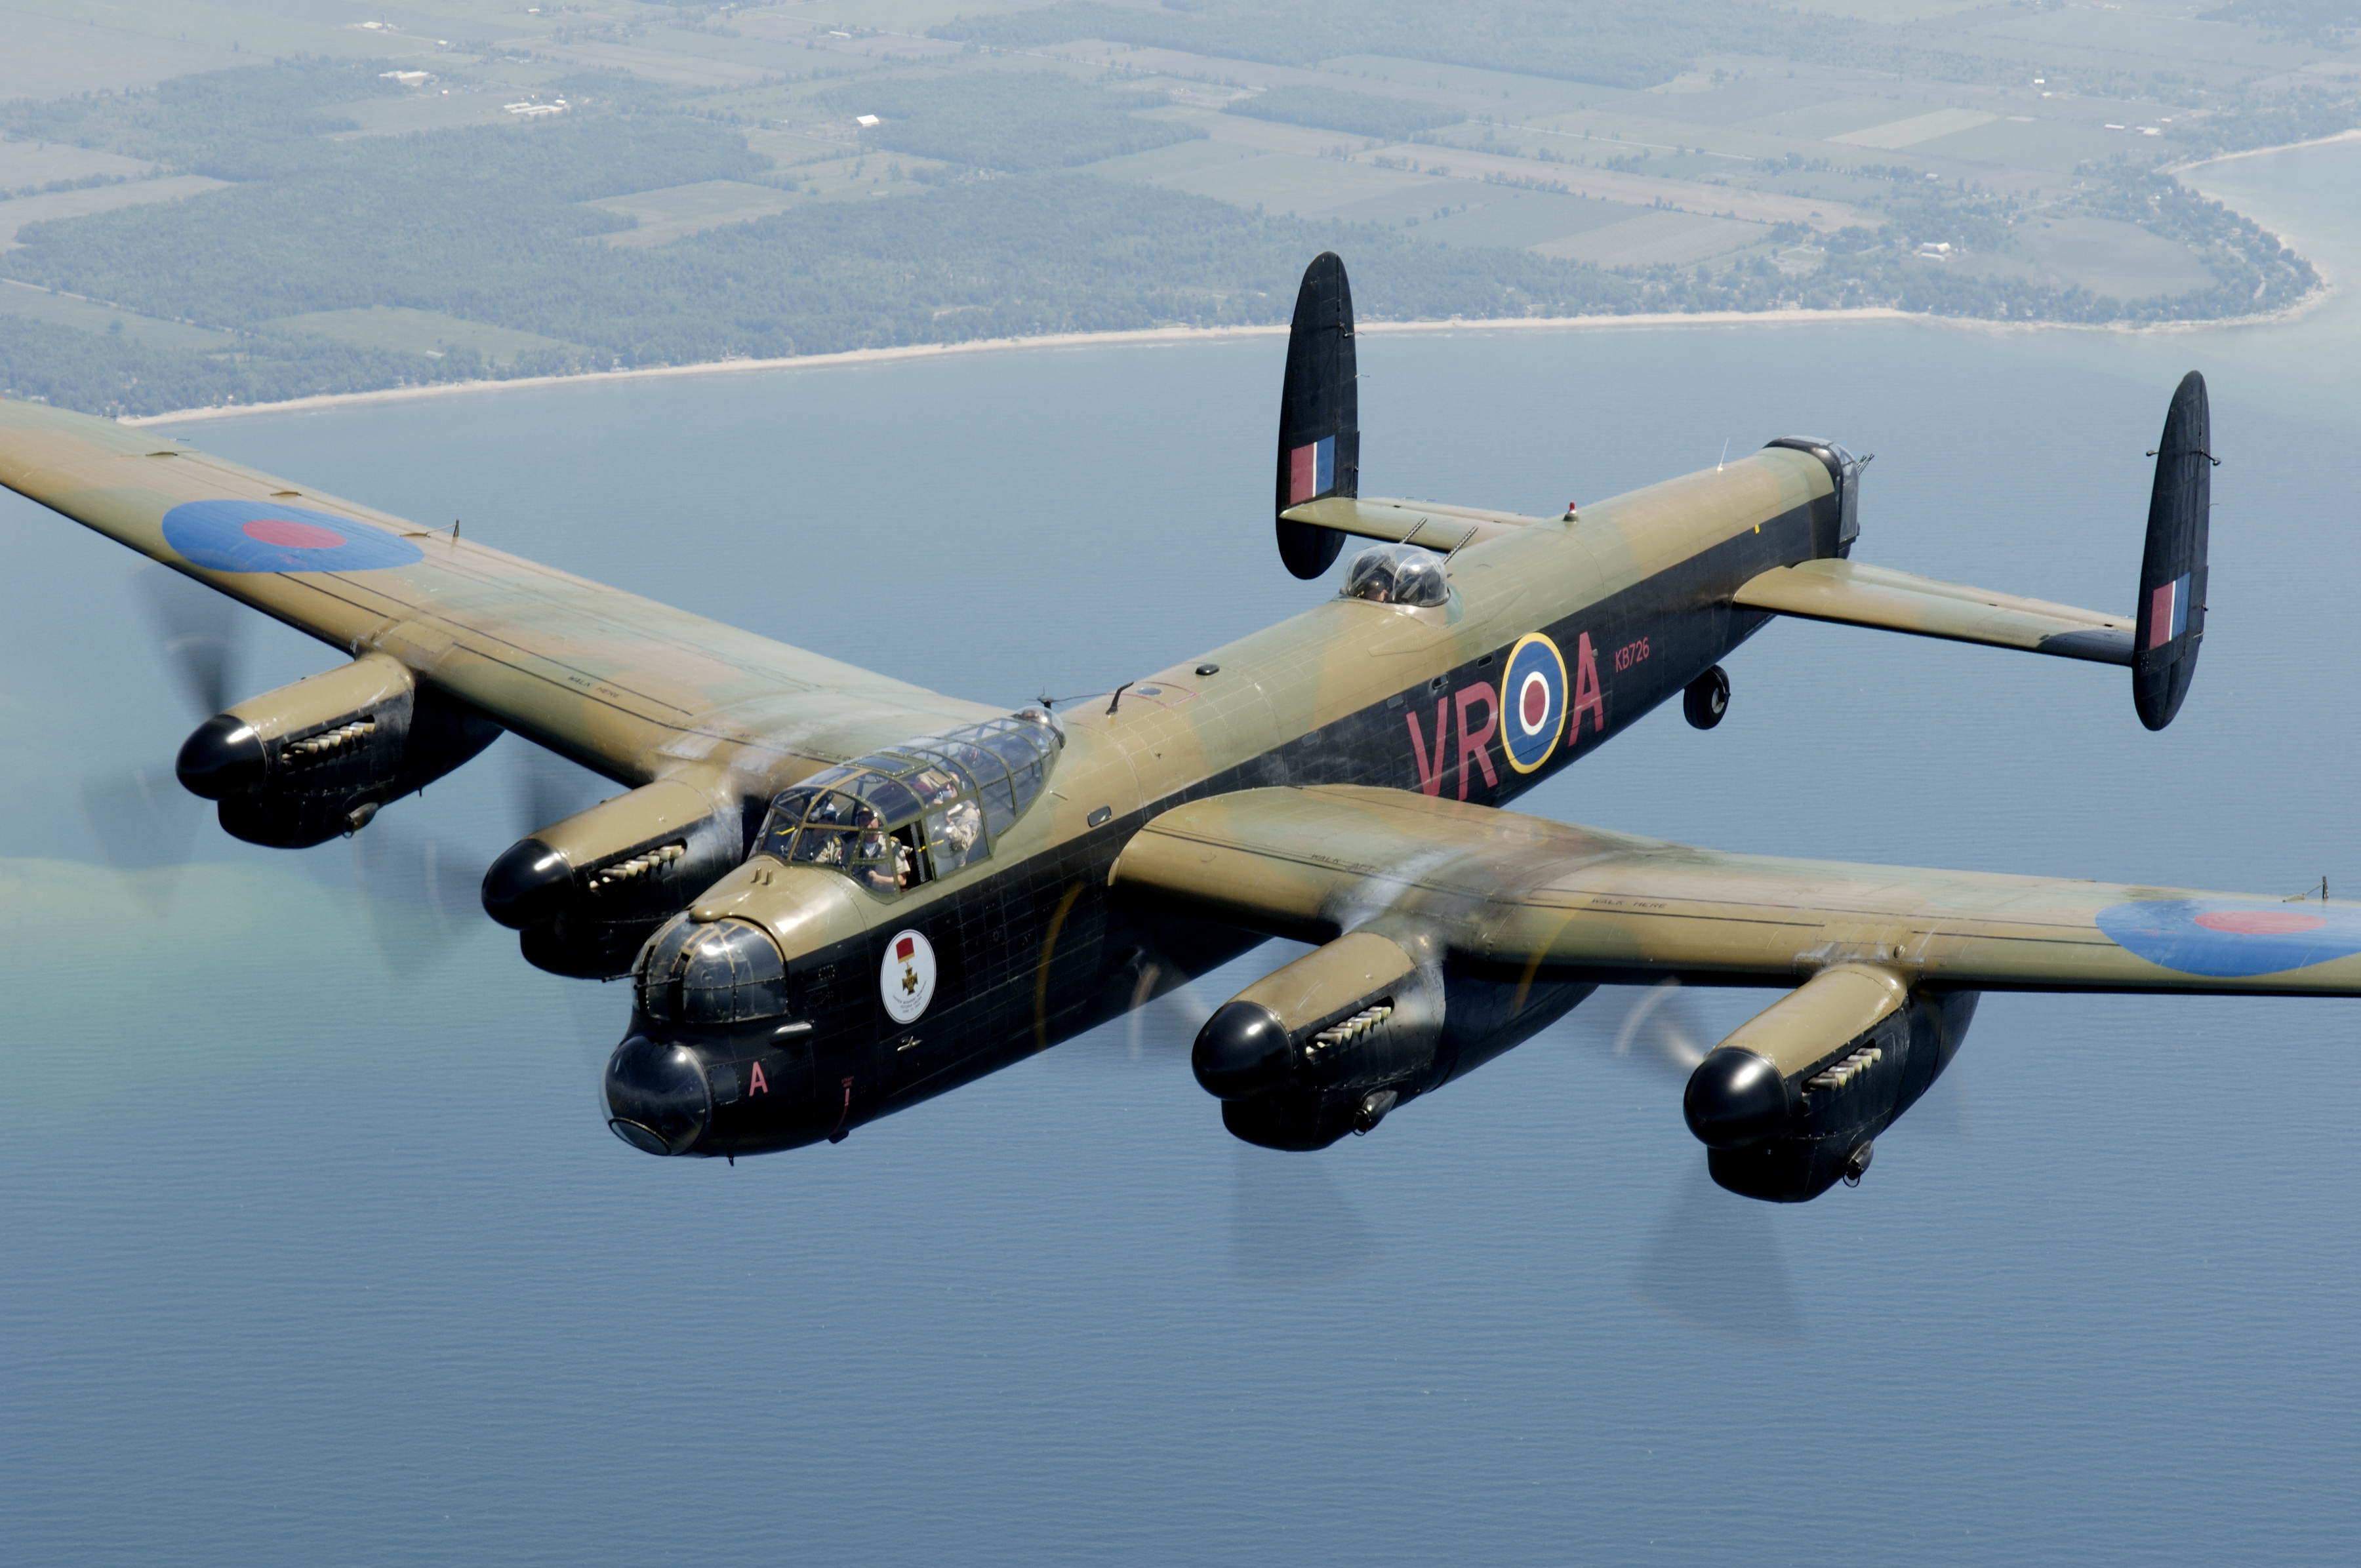 And then there were two. Al Mickeloff, marketing manager at the Canadian Warplane Heritage Museum in Hamilton, Ontario, Canada provided us with this shot by Rick Radell of one of the only two flying Lancasters on earth.  